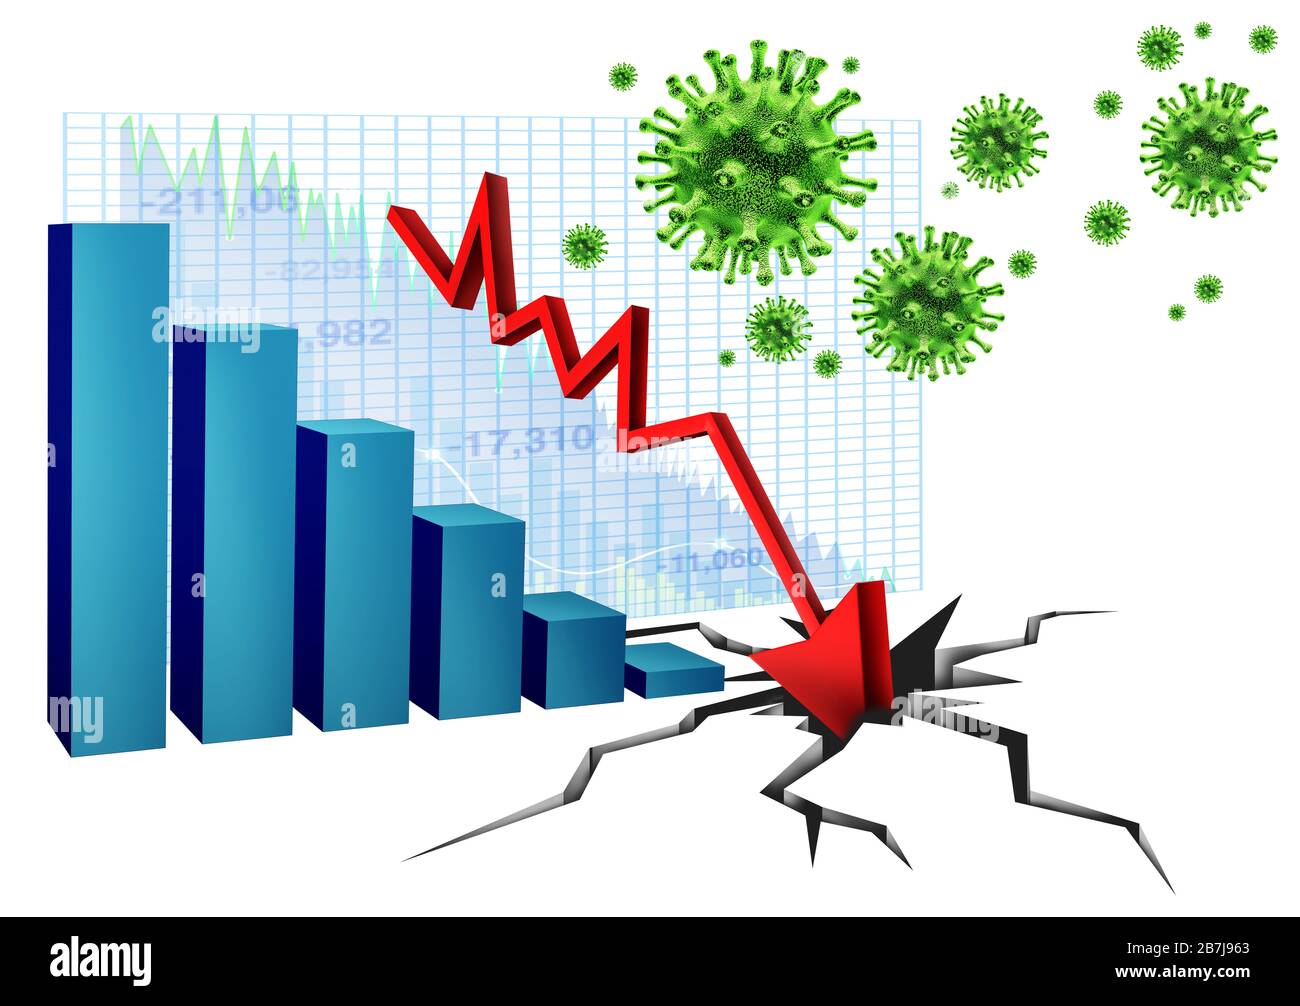 Economy and health care as an economic pandemic fear and coronavirus fears or virus Outbreak and Stock market selling as a stock financial recession. Stock Photo